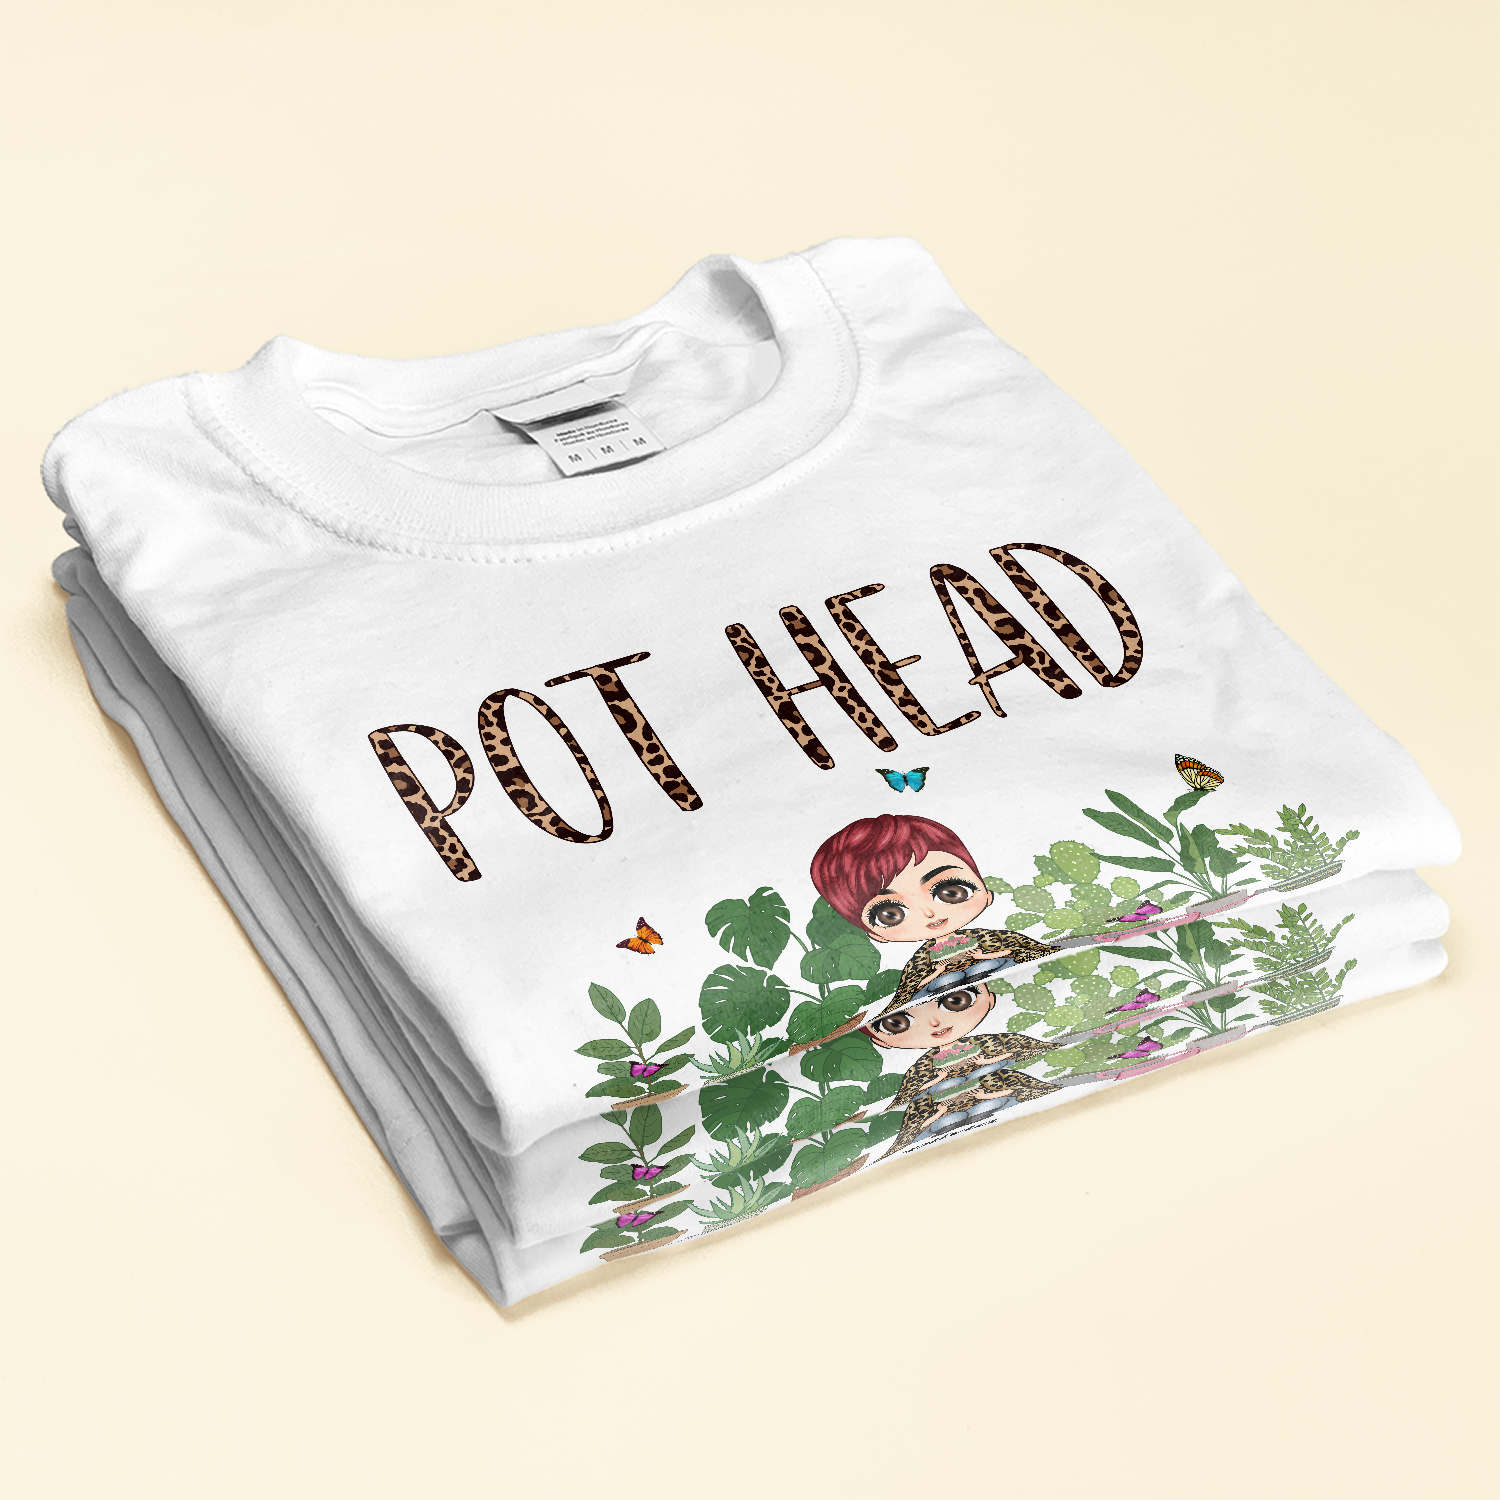 Pot Head - Personalized Shirt - Birthday Gift For Gardener, Plant Lovers